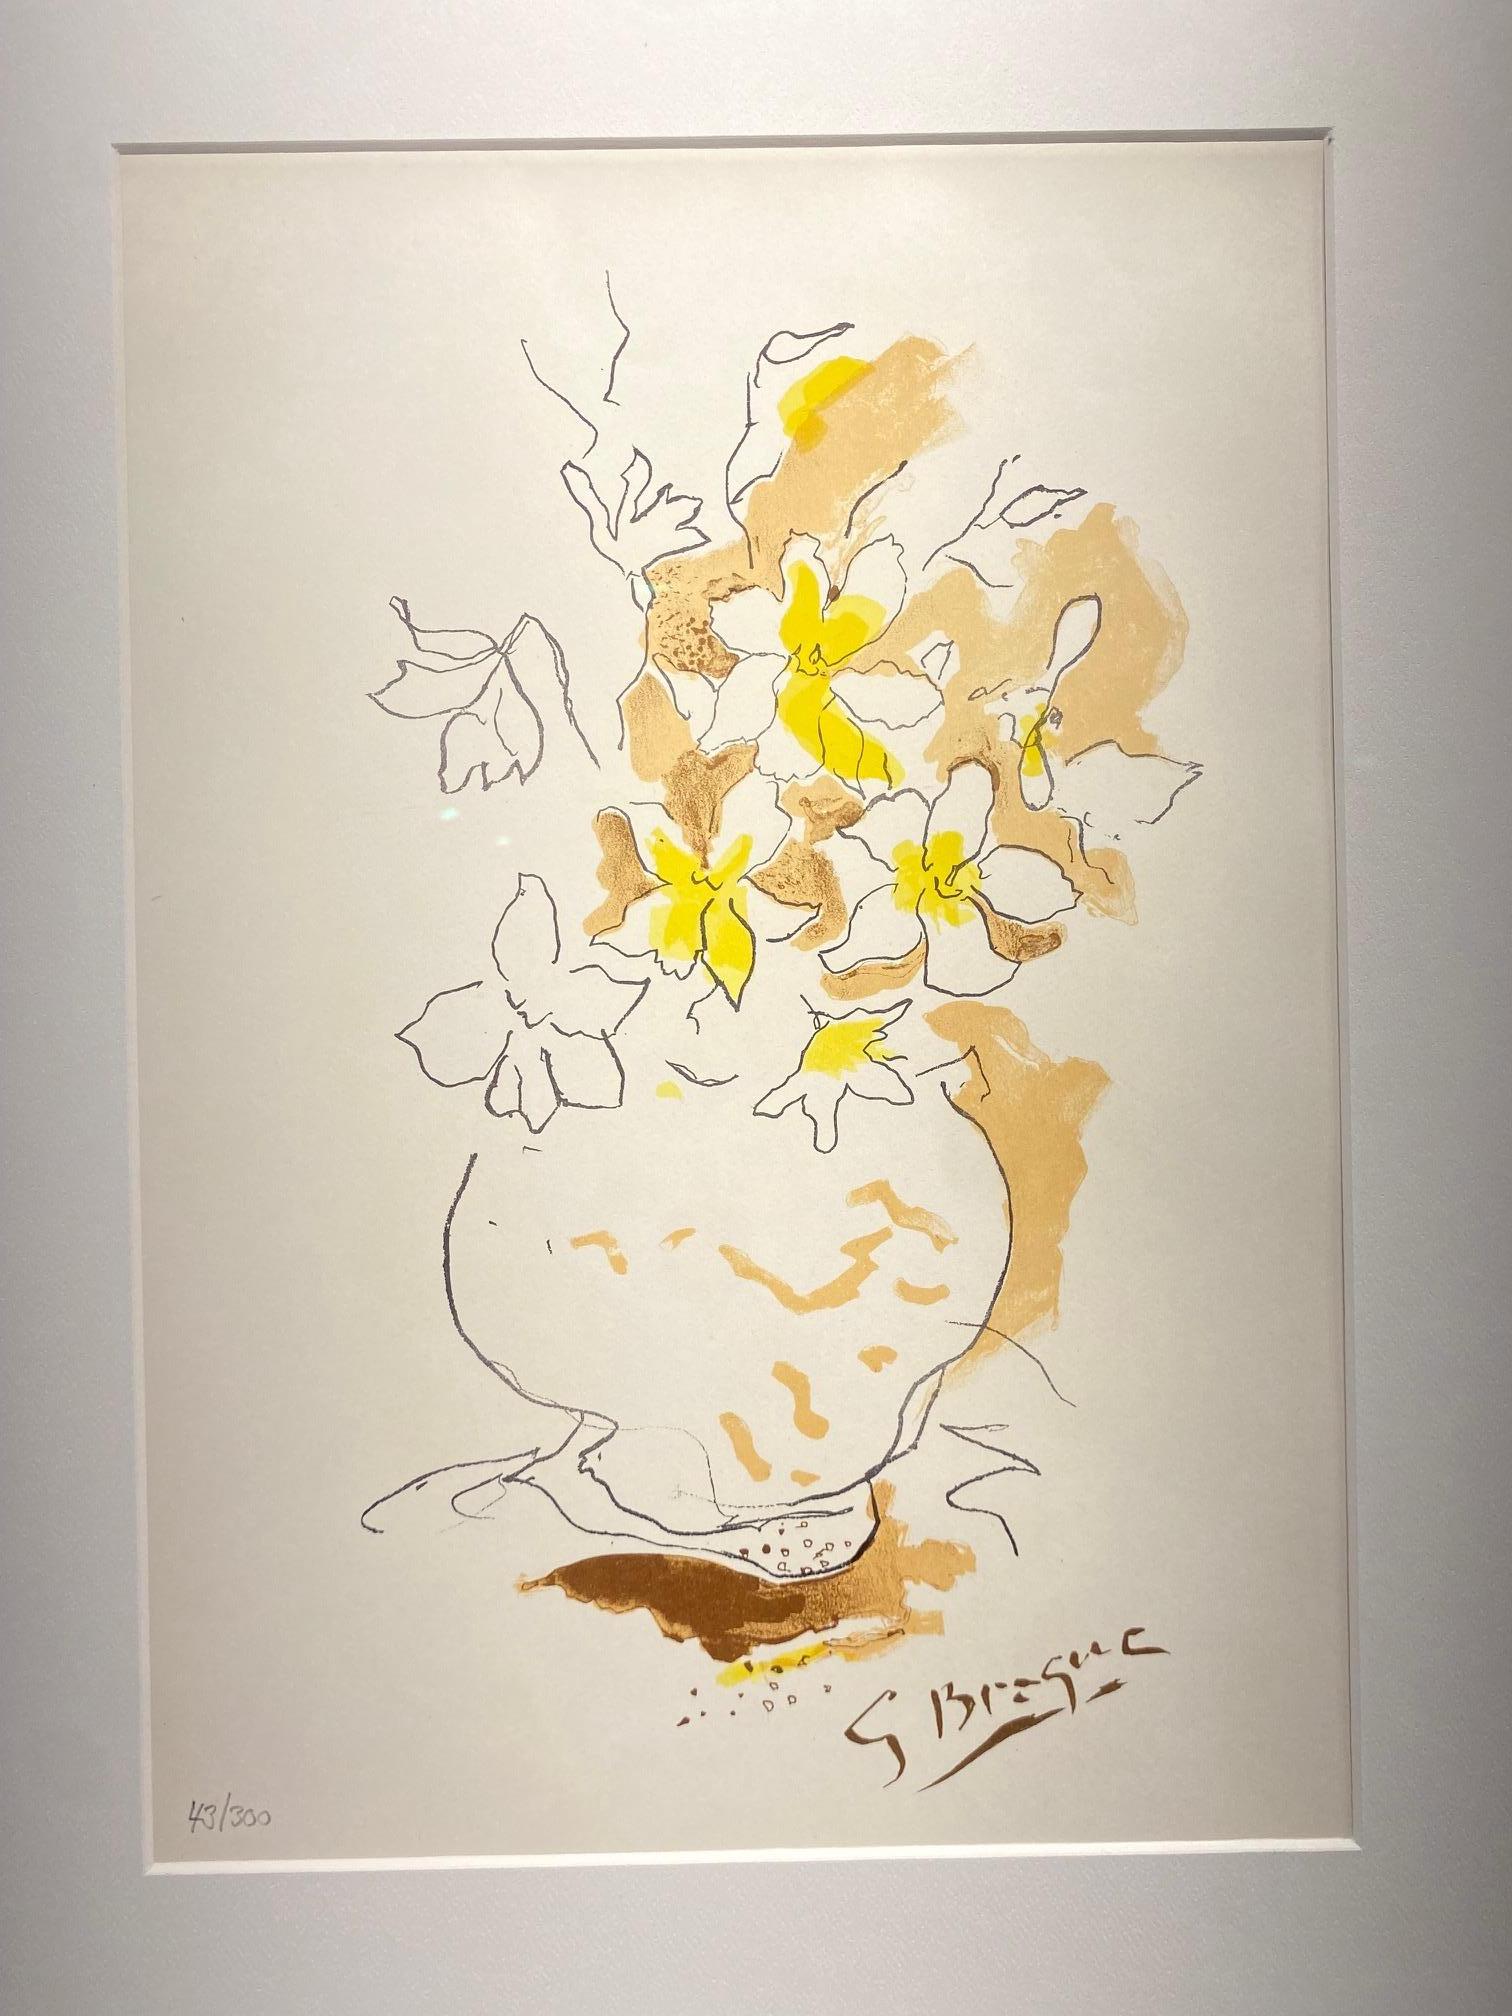 Flower Vase - original modern lithograph by classical modernist Georges Braque For Sale 1